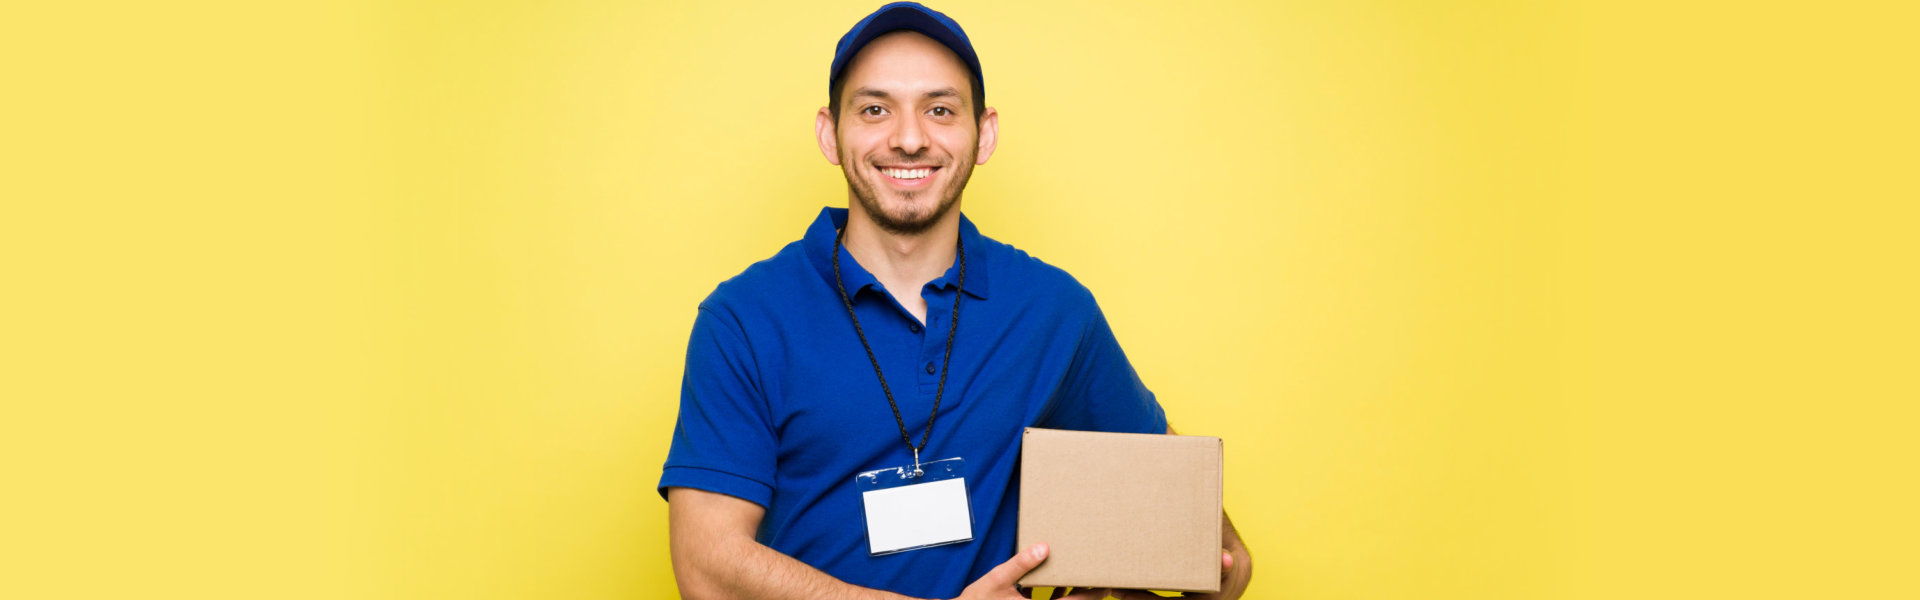 man holding a package under his arm